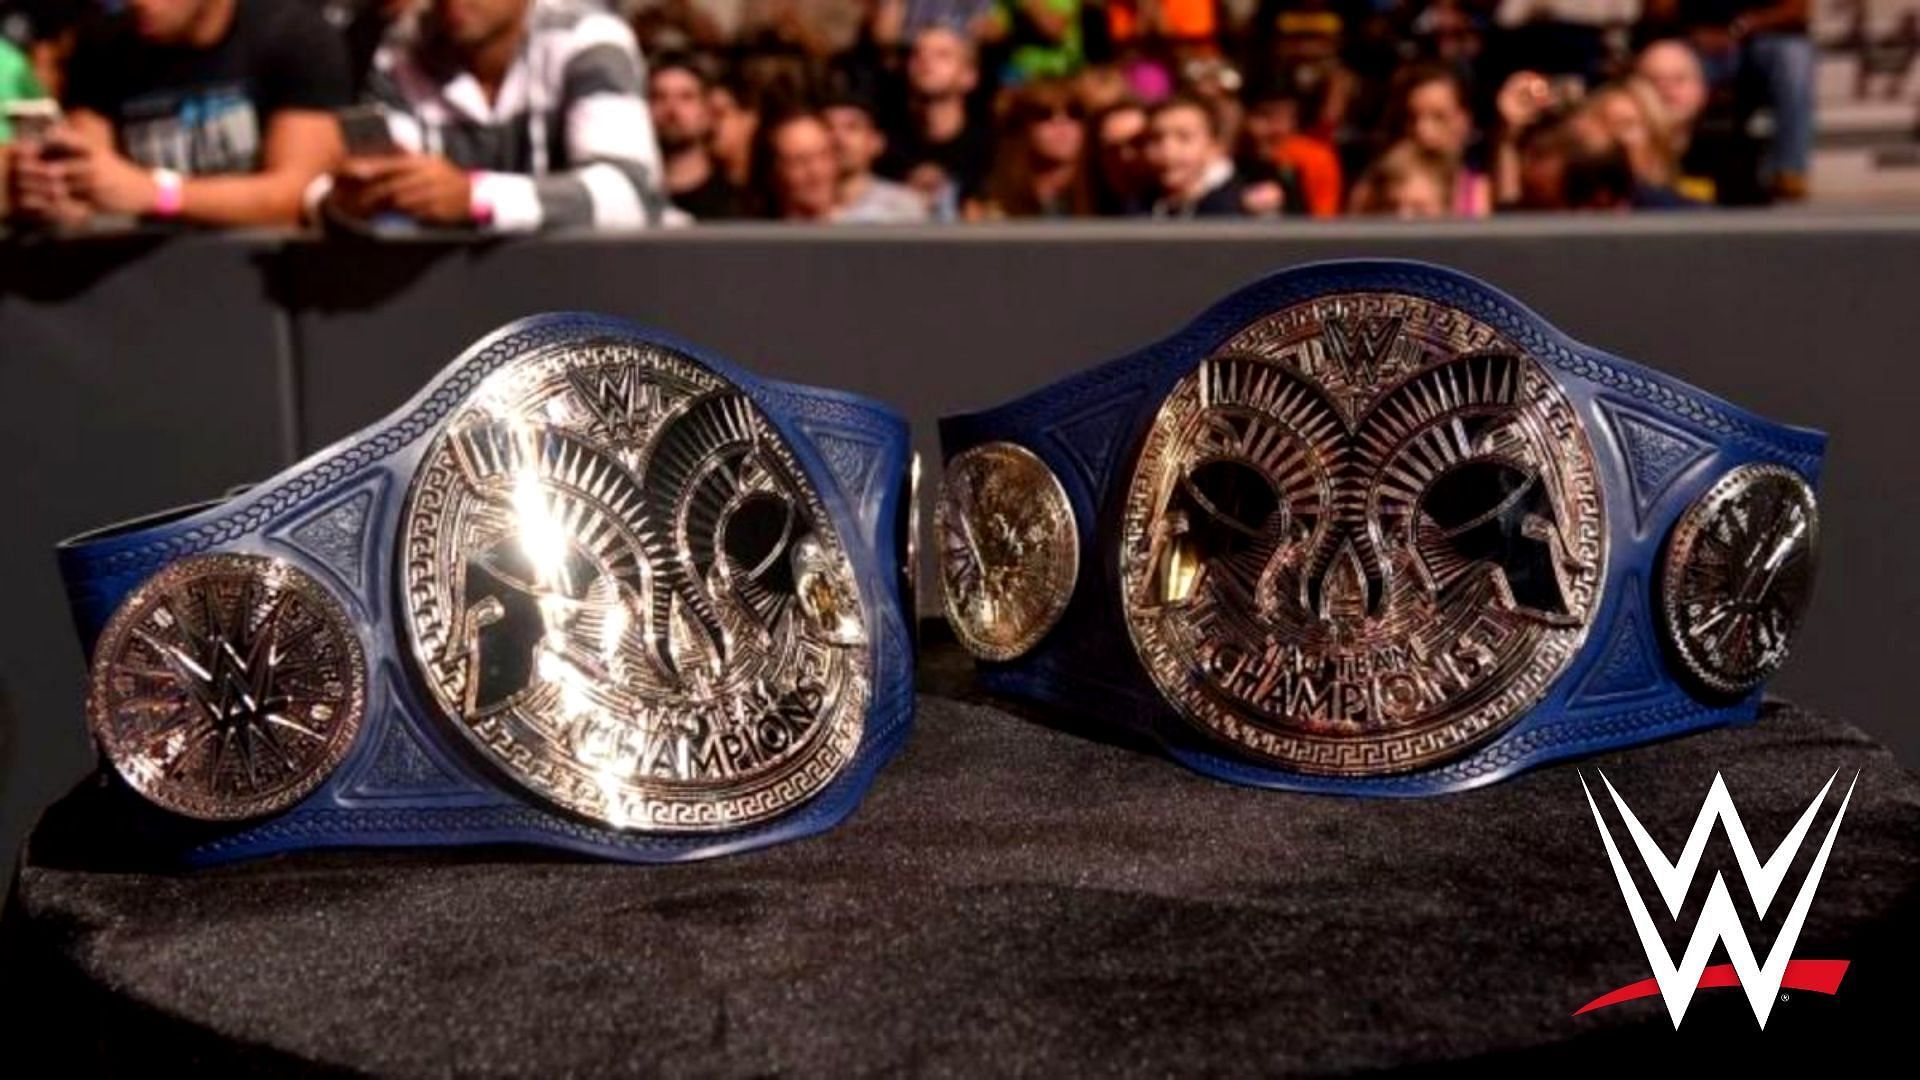 The WWE SmackDown Tag Team Championship